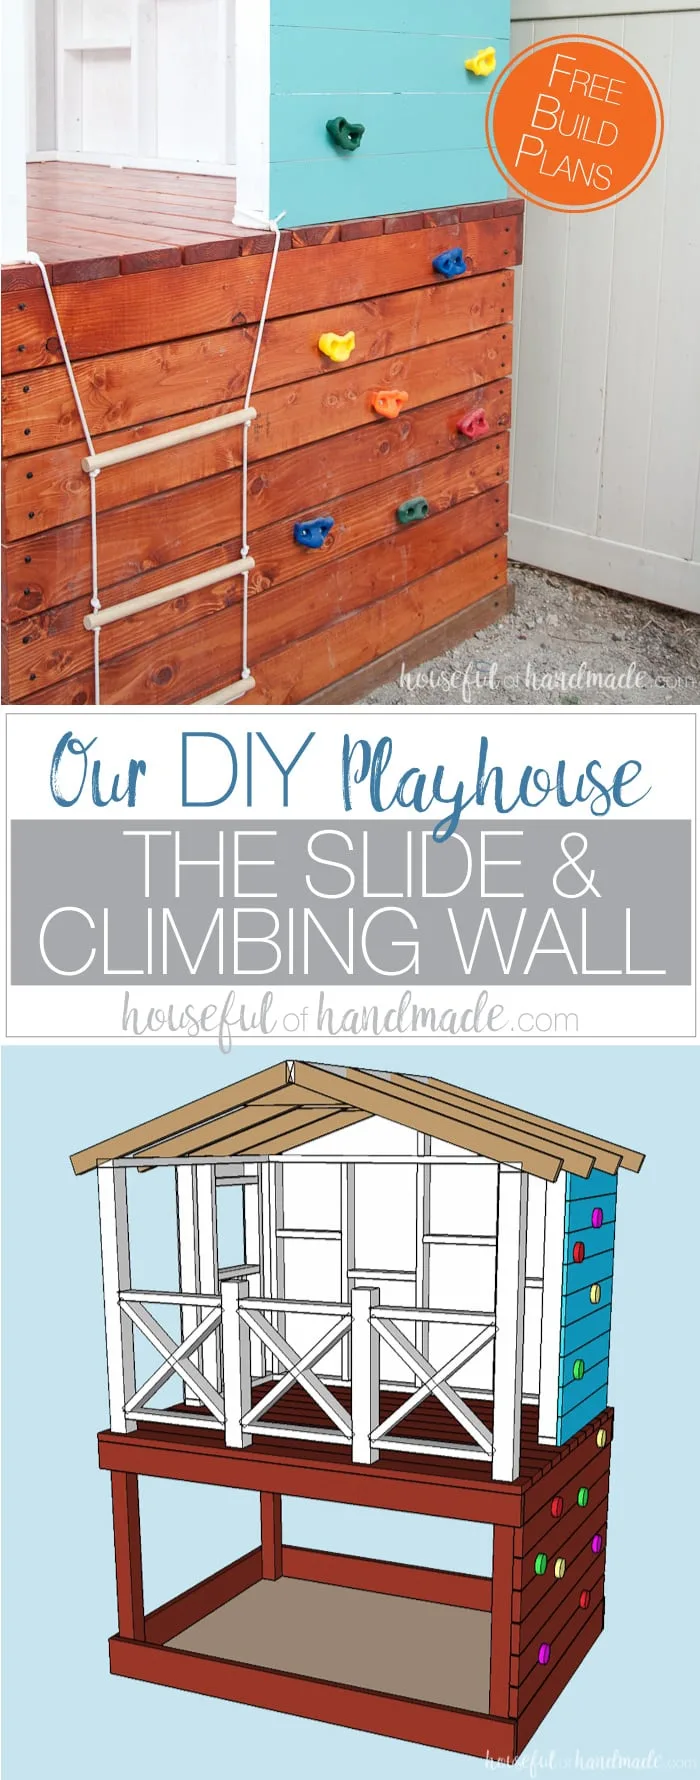 Our DIY playhouse is almost done! This week we are sharing all the details on how we installed the slide and climbing wall to make the playhouse into a kids dream play area. Includes the build plans and cost breakdown for the whole project. Housefulofhandmade.com | How to build a playhouse | DIY swing set | Kids Playhouse | Free Build plans | How to Install a slide 